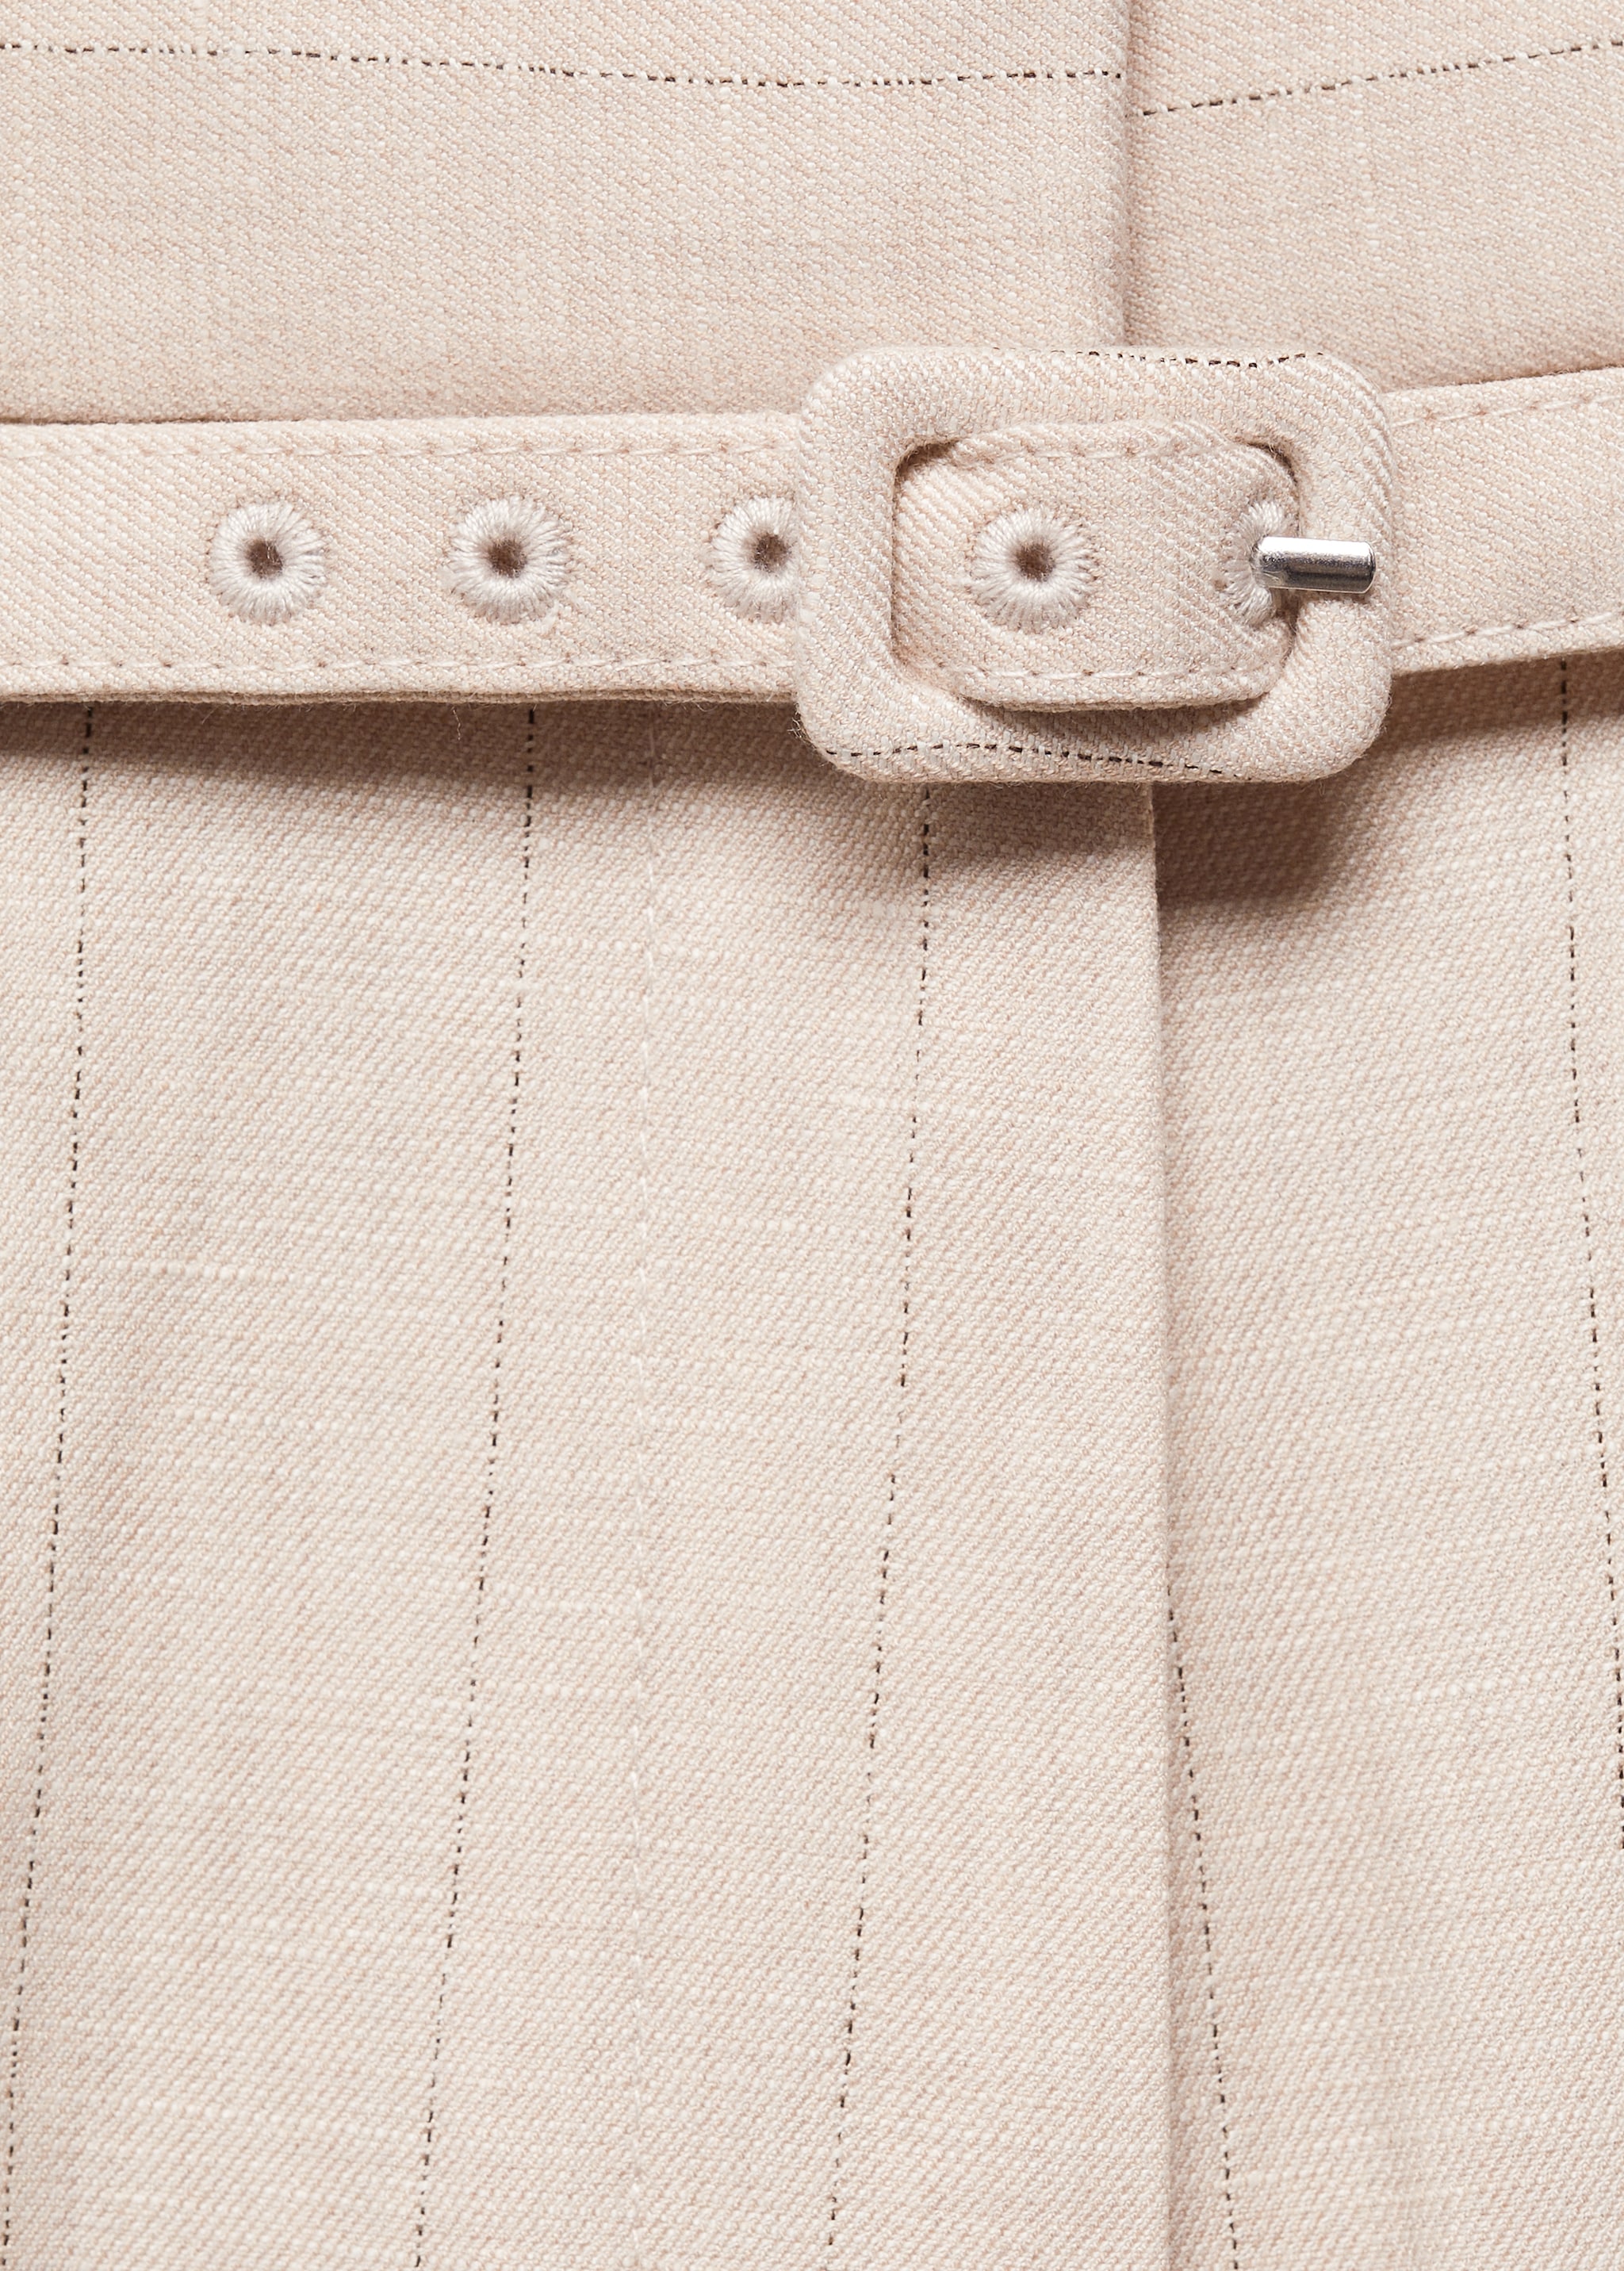 Suit trousers with belt clips - Details of the article 8